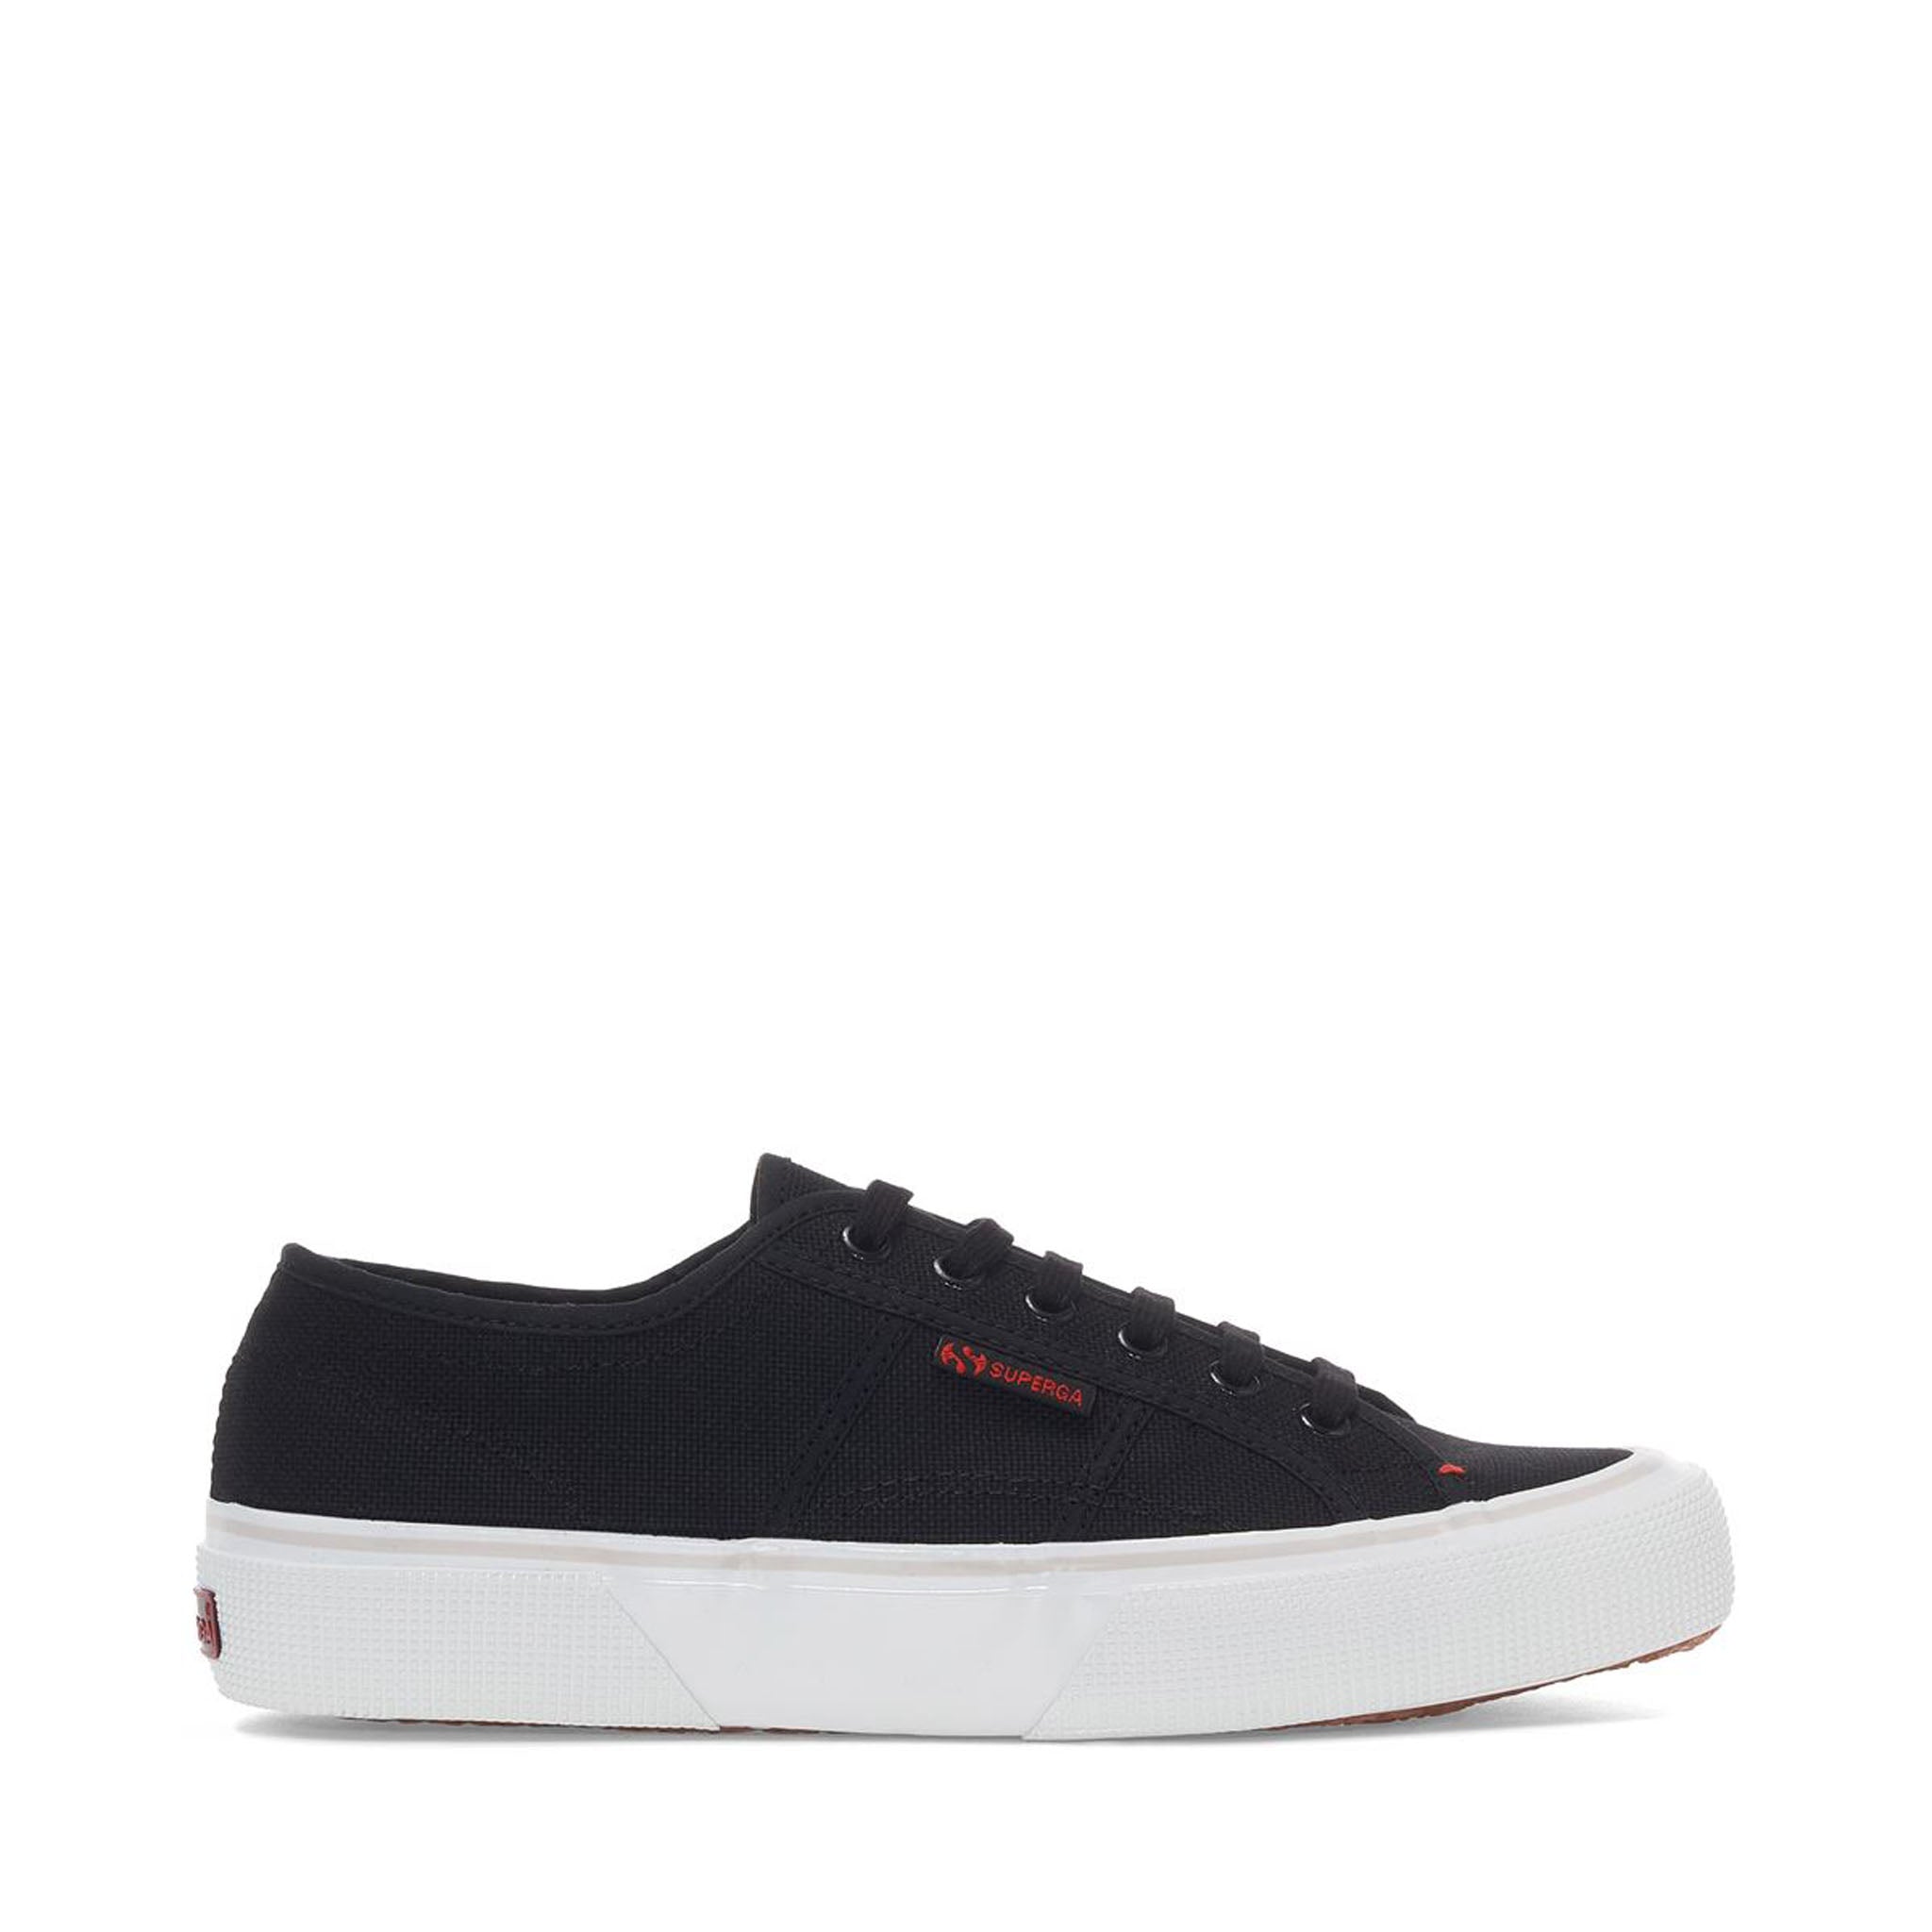 Superga 2490 Bold Sneakers - Black Red. Side view.